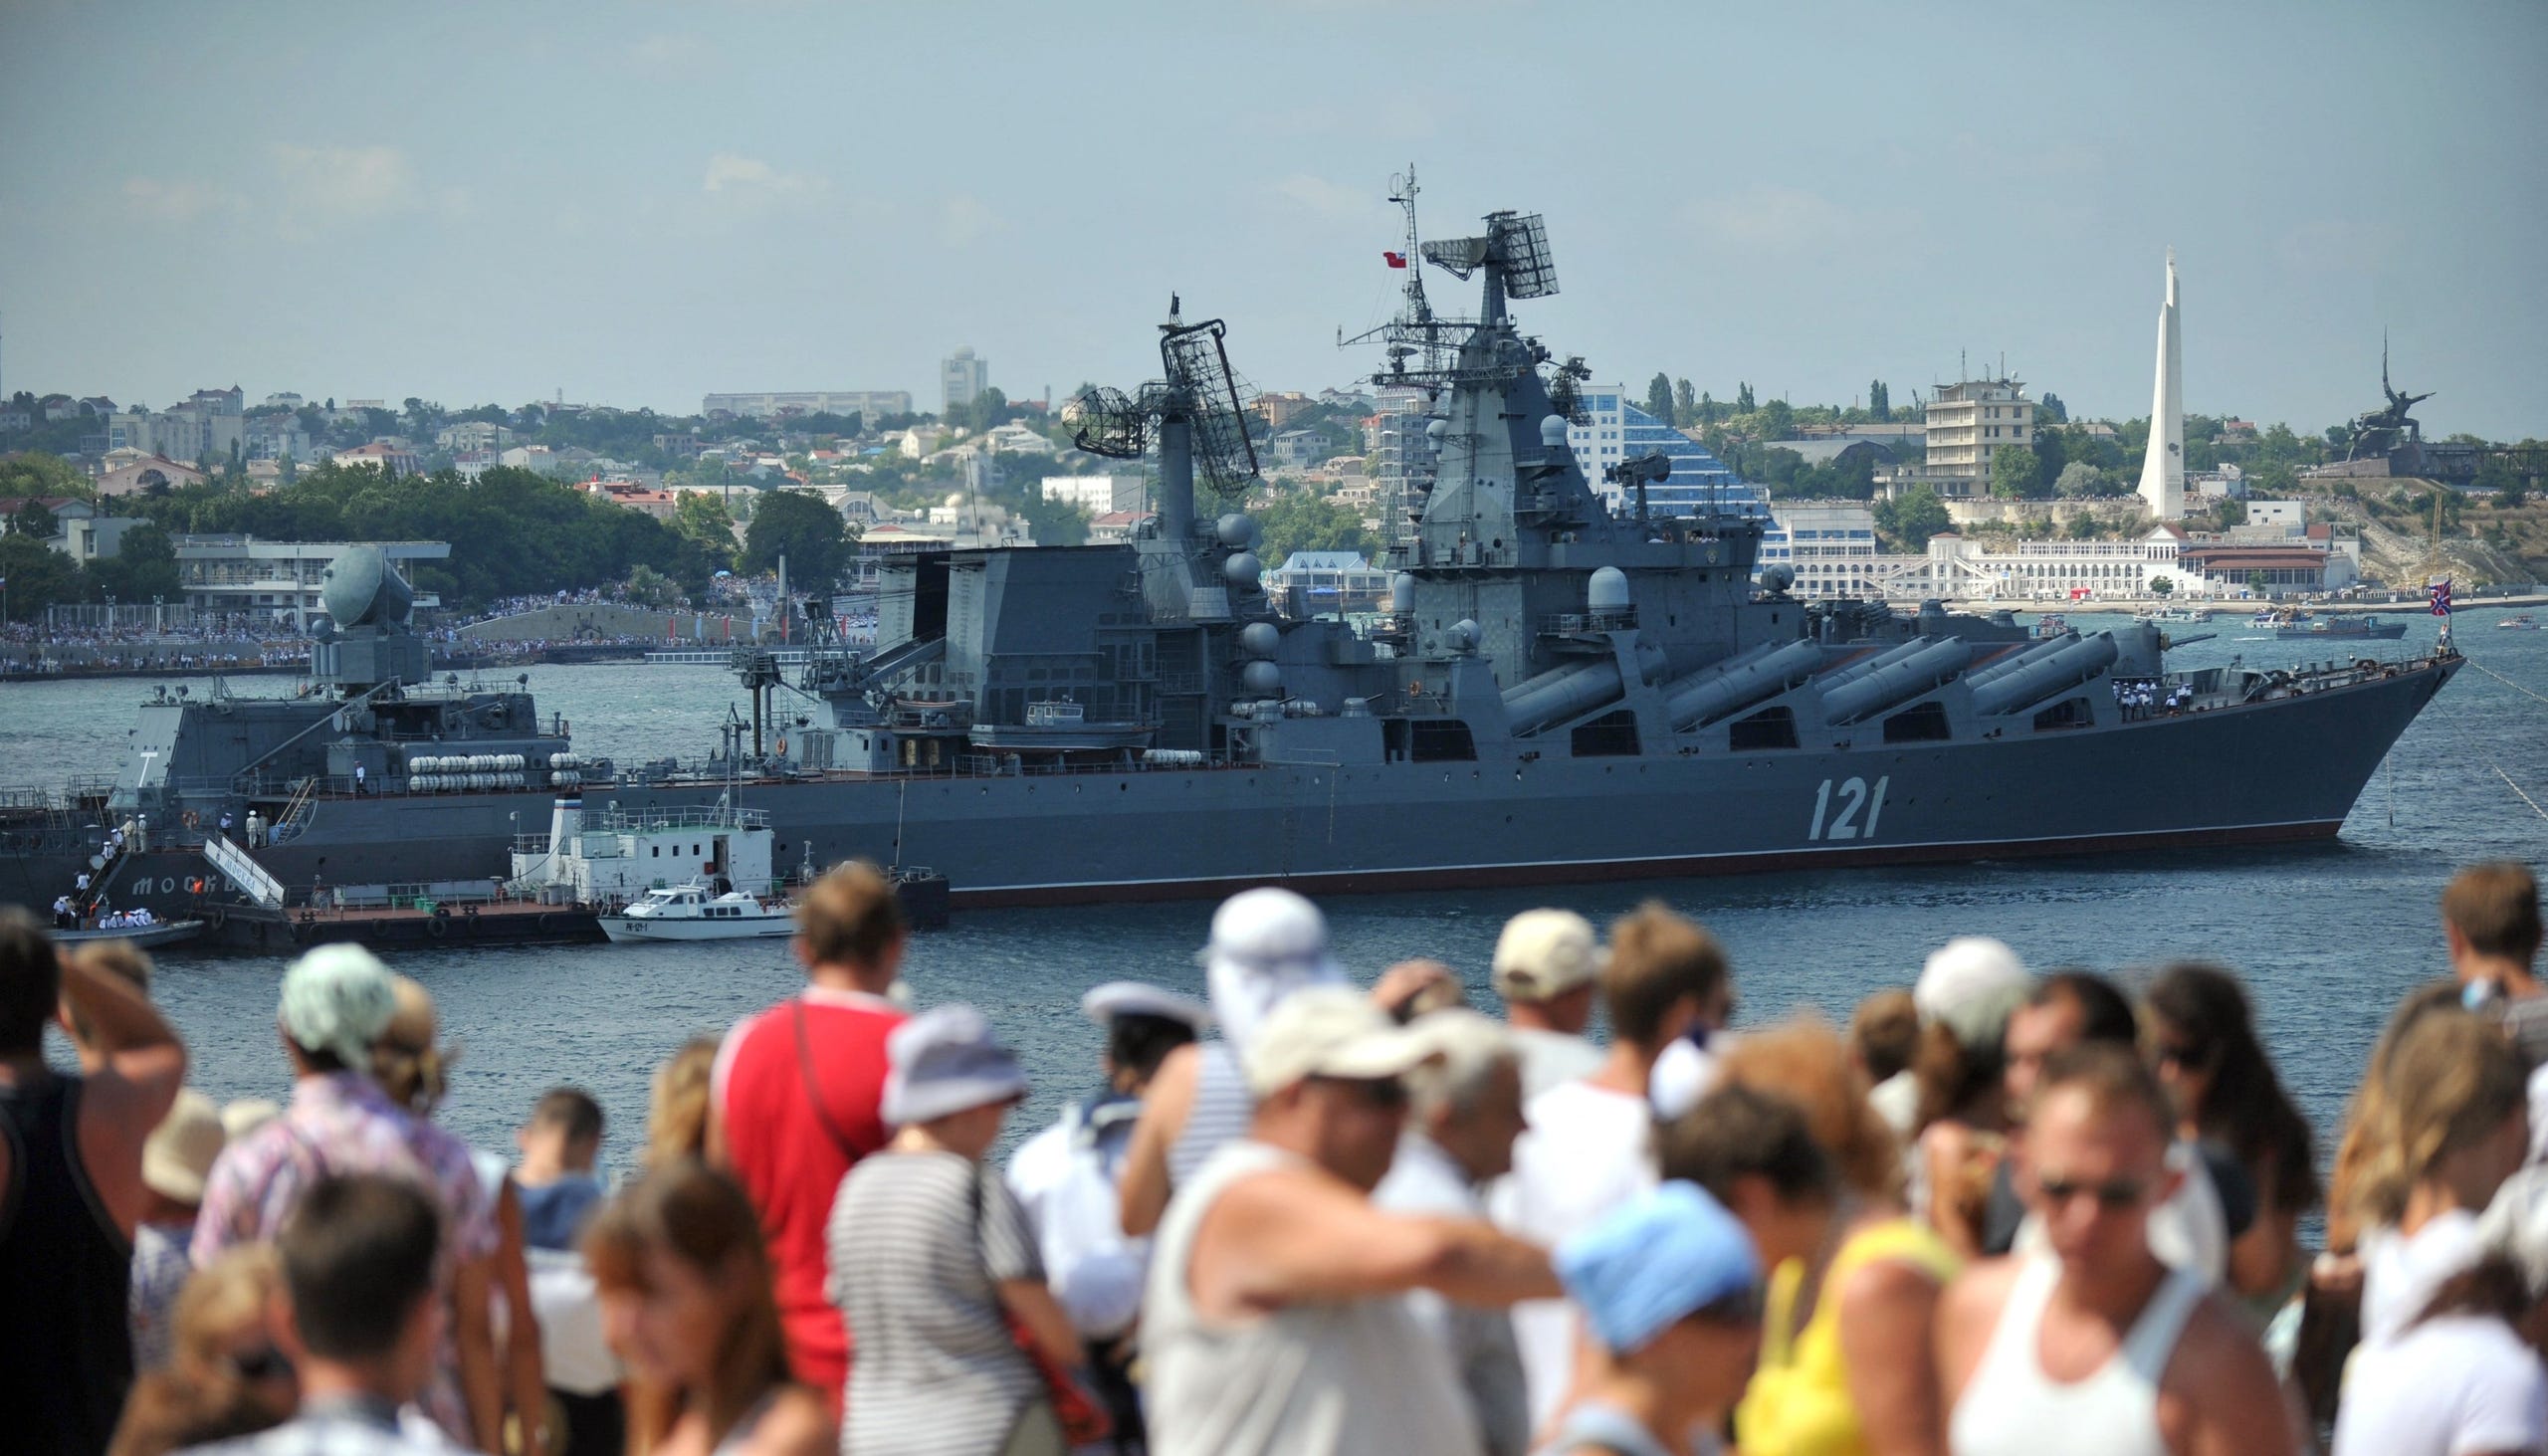 This file photo taken on July 31, 2011 shows the Moskva guided missile cruiser participating in a Russian military Navy Day parade near a navy base in Sevastopol.